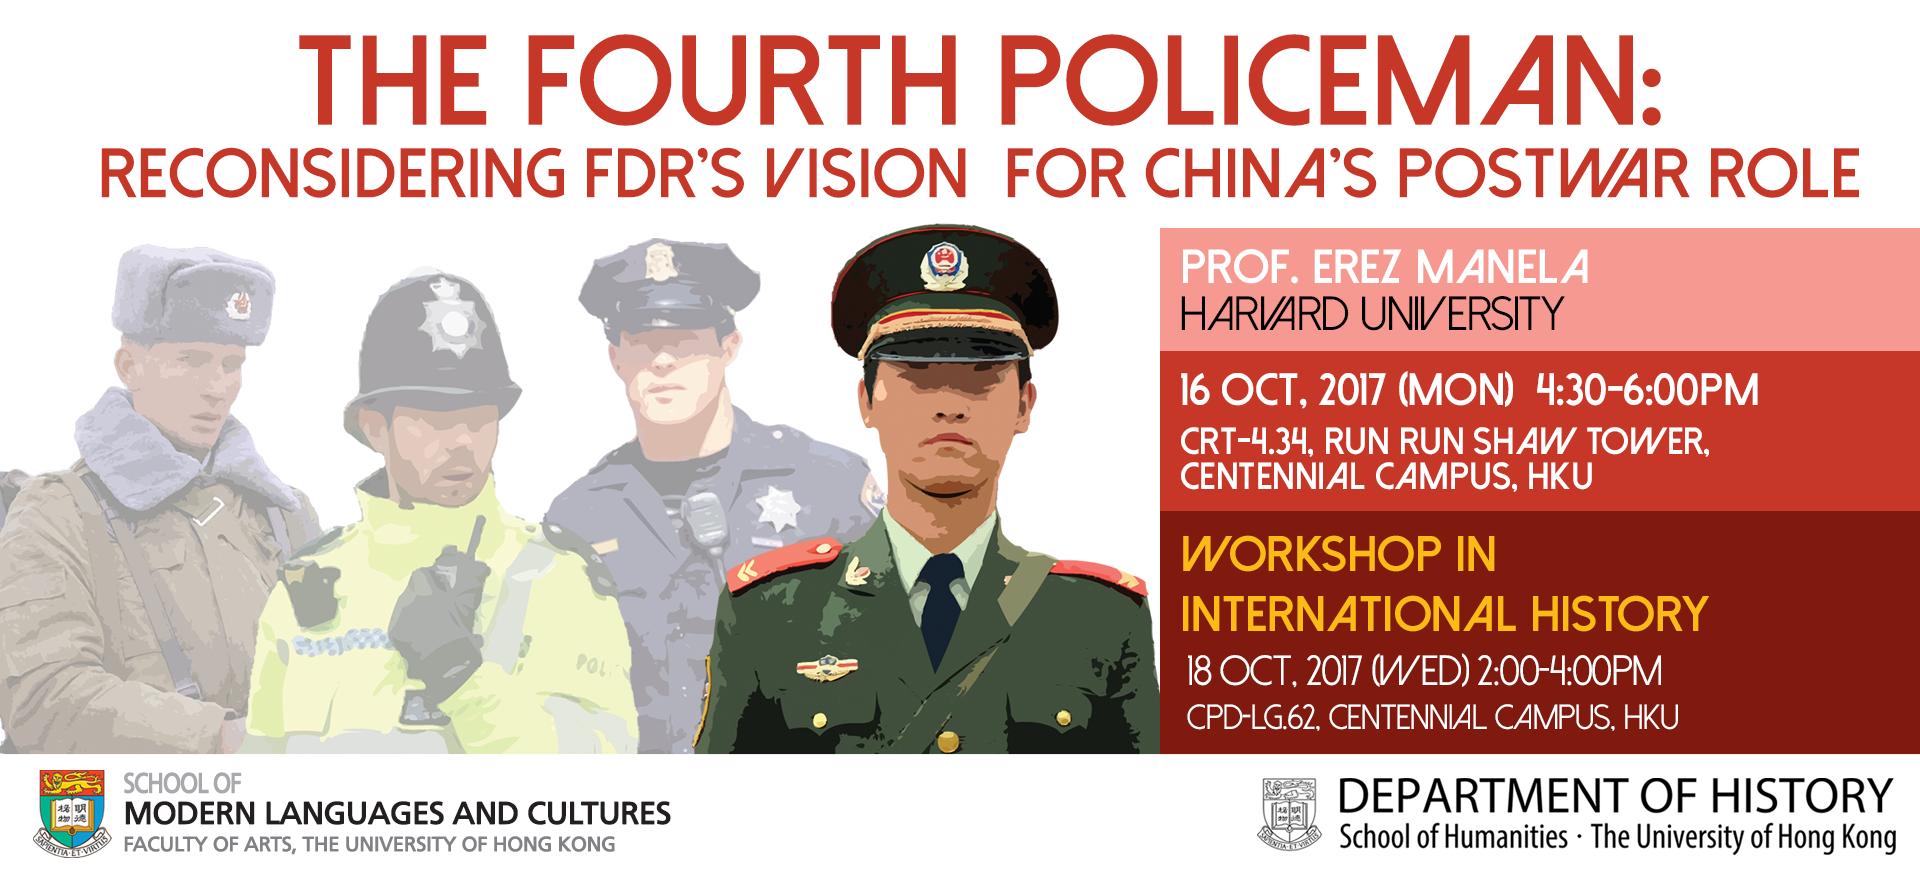 The Fourth Policeman: Reconsidering FDR's Vision for China's Postwar Role